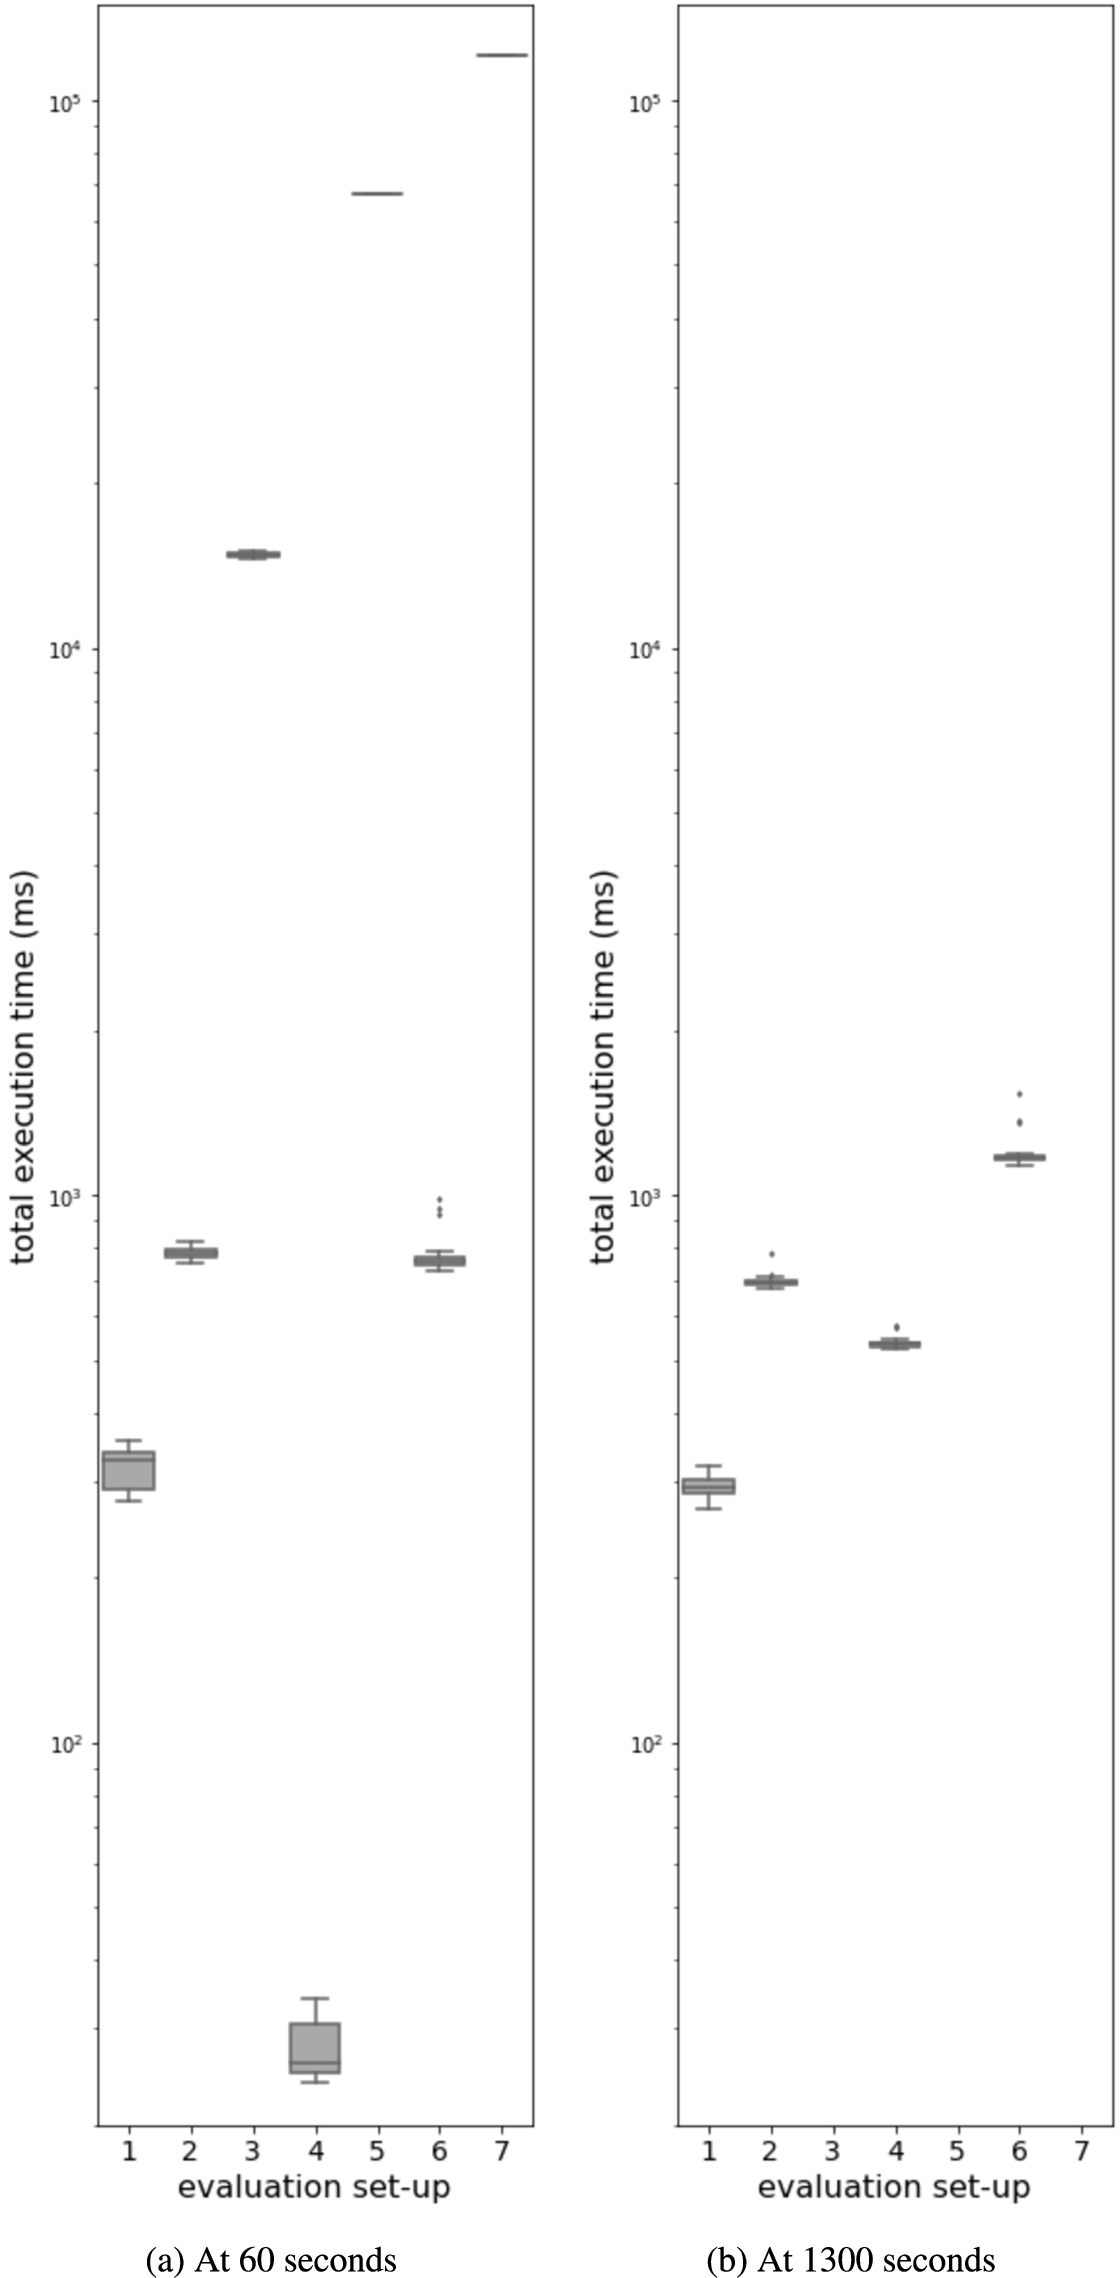 Results of the comparison of the DIVIDE real-time query evaluation approach with real-time reasoning approaches, for the toileting query. For each evaluation set-up, the results show a boxplot distribution of the total execution time from the generation event (either a windowed event in a streaming set-up or an incoming event in a non-streaming set-up) until the routine activity prediction as output of the (final) query. The distribution is shown for two timestamps corresponding to the mean values for this timestamp plotted in Fig. 5.